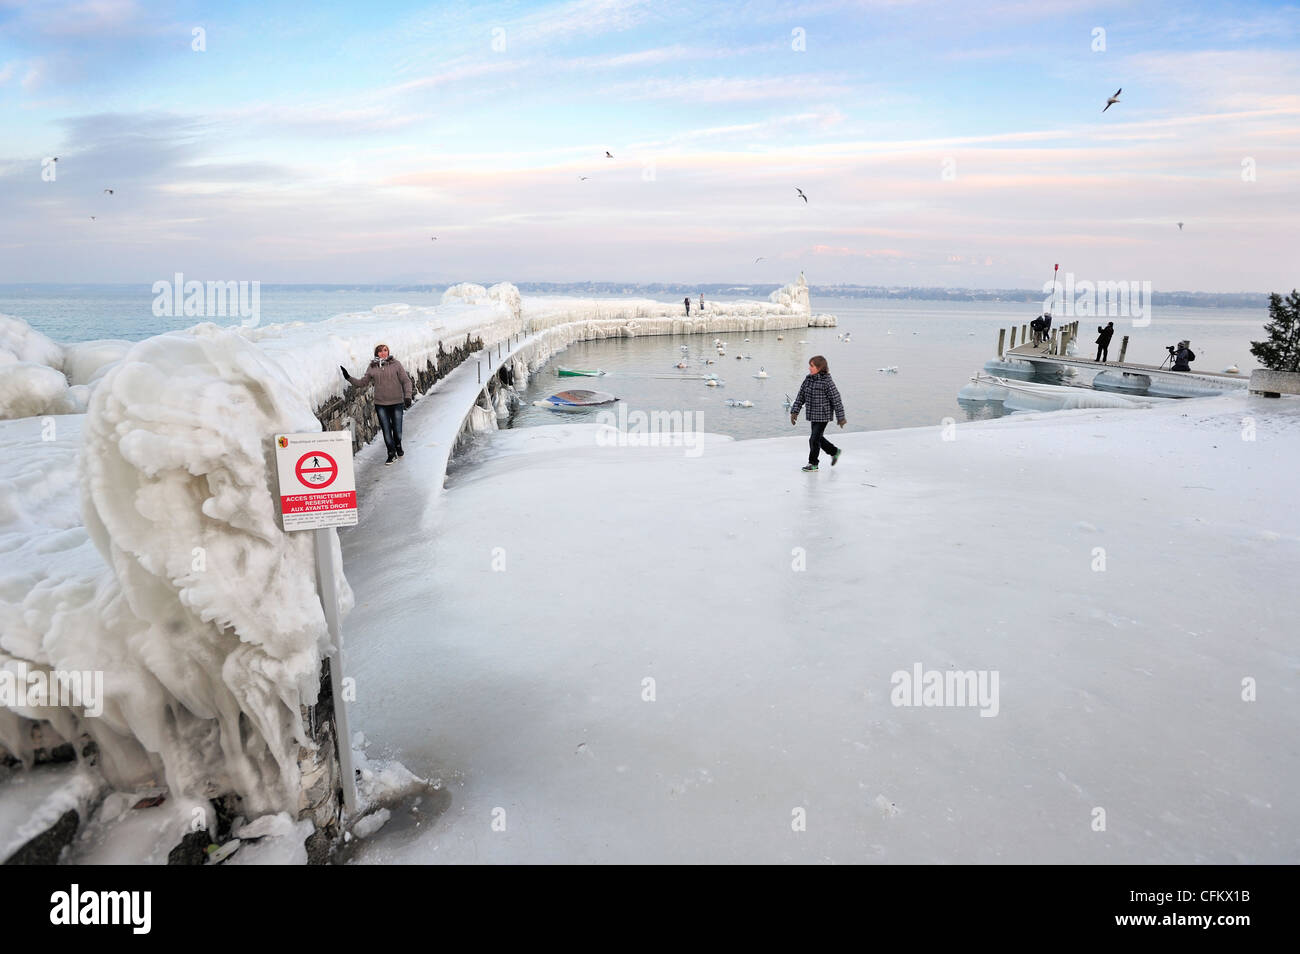 The port of Versoix, Switzerland, on Lake Geneva, after an ice storm Stock Photo